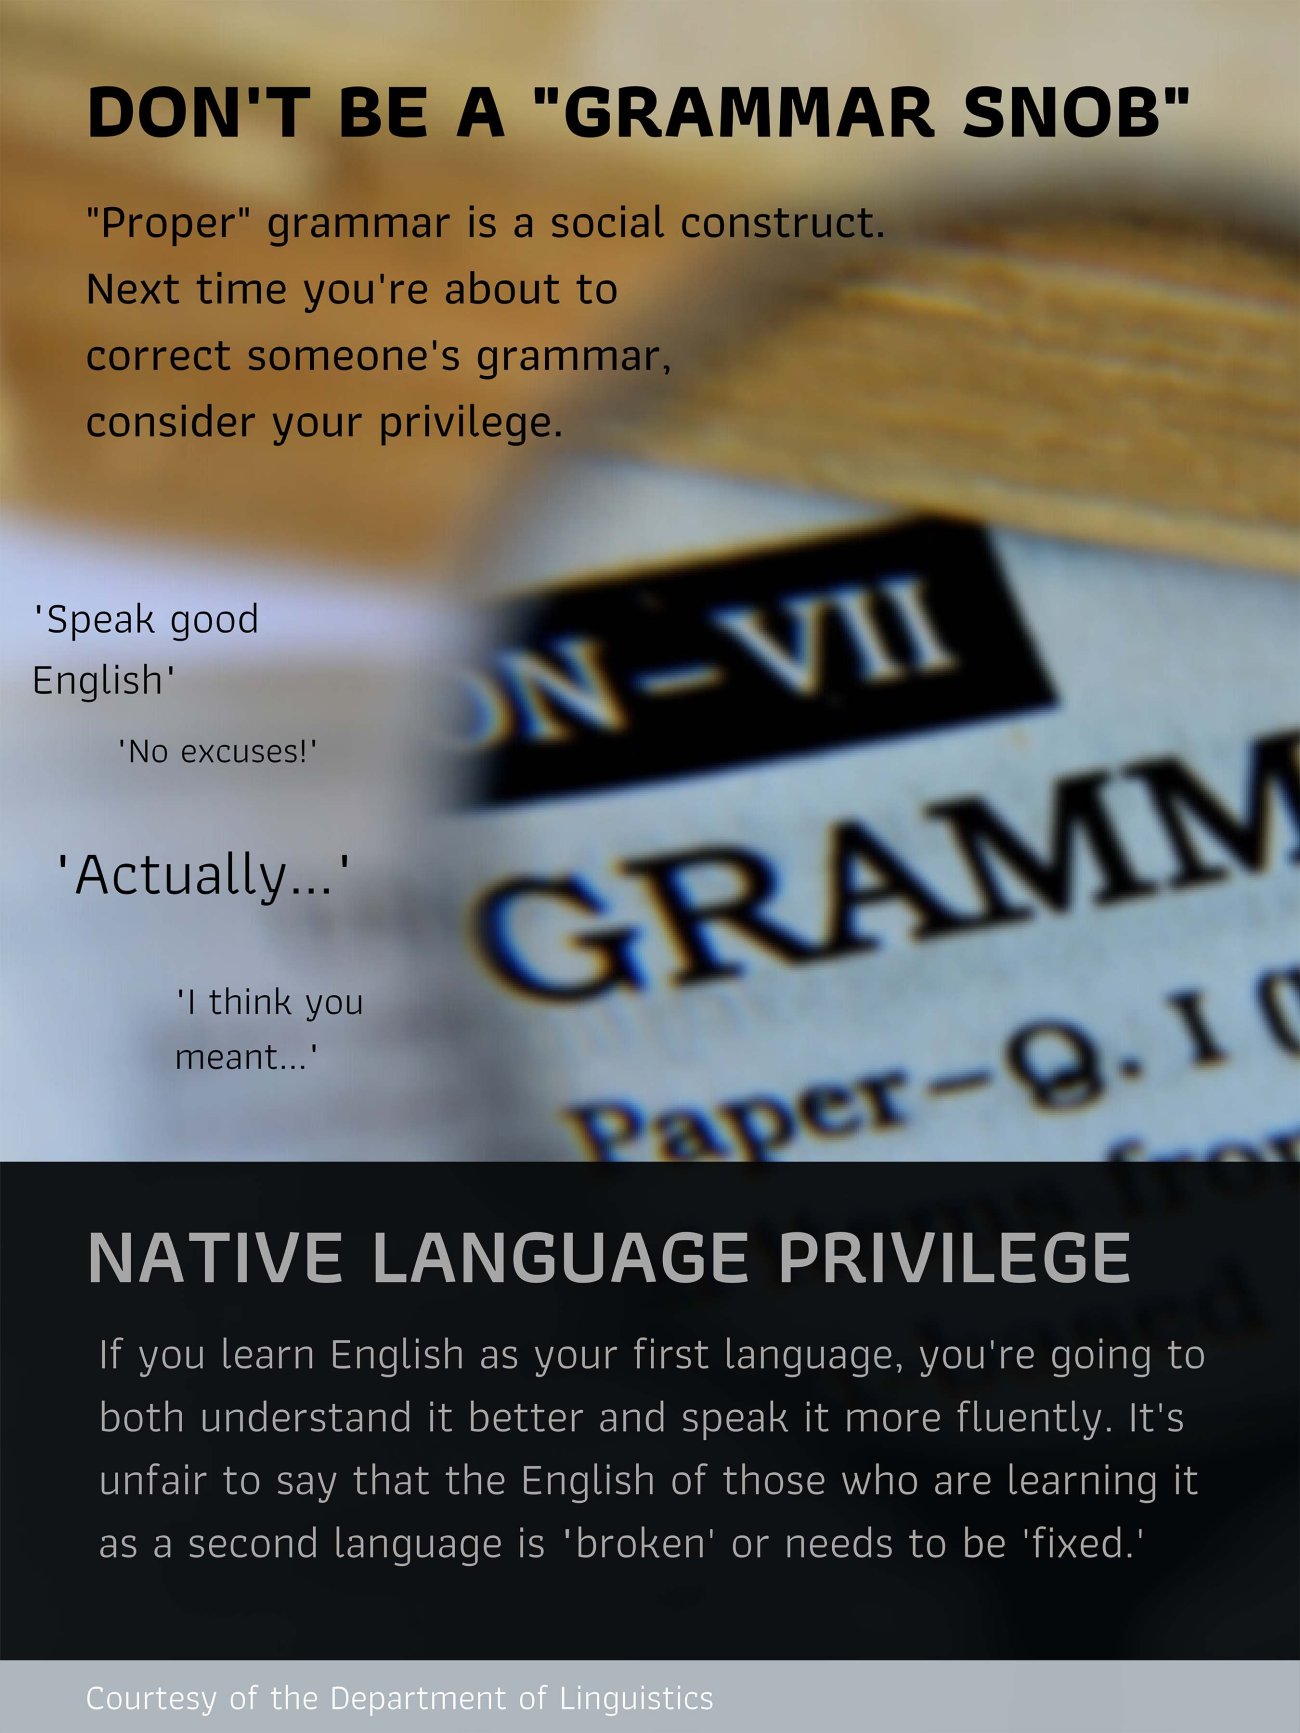 Don't be a grammar snob. Consider your native language privilege. Click on image for full description.